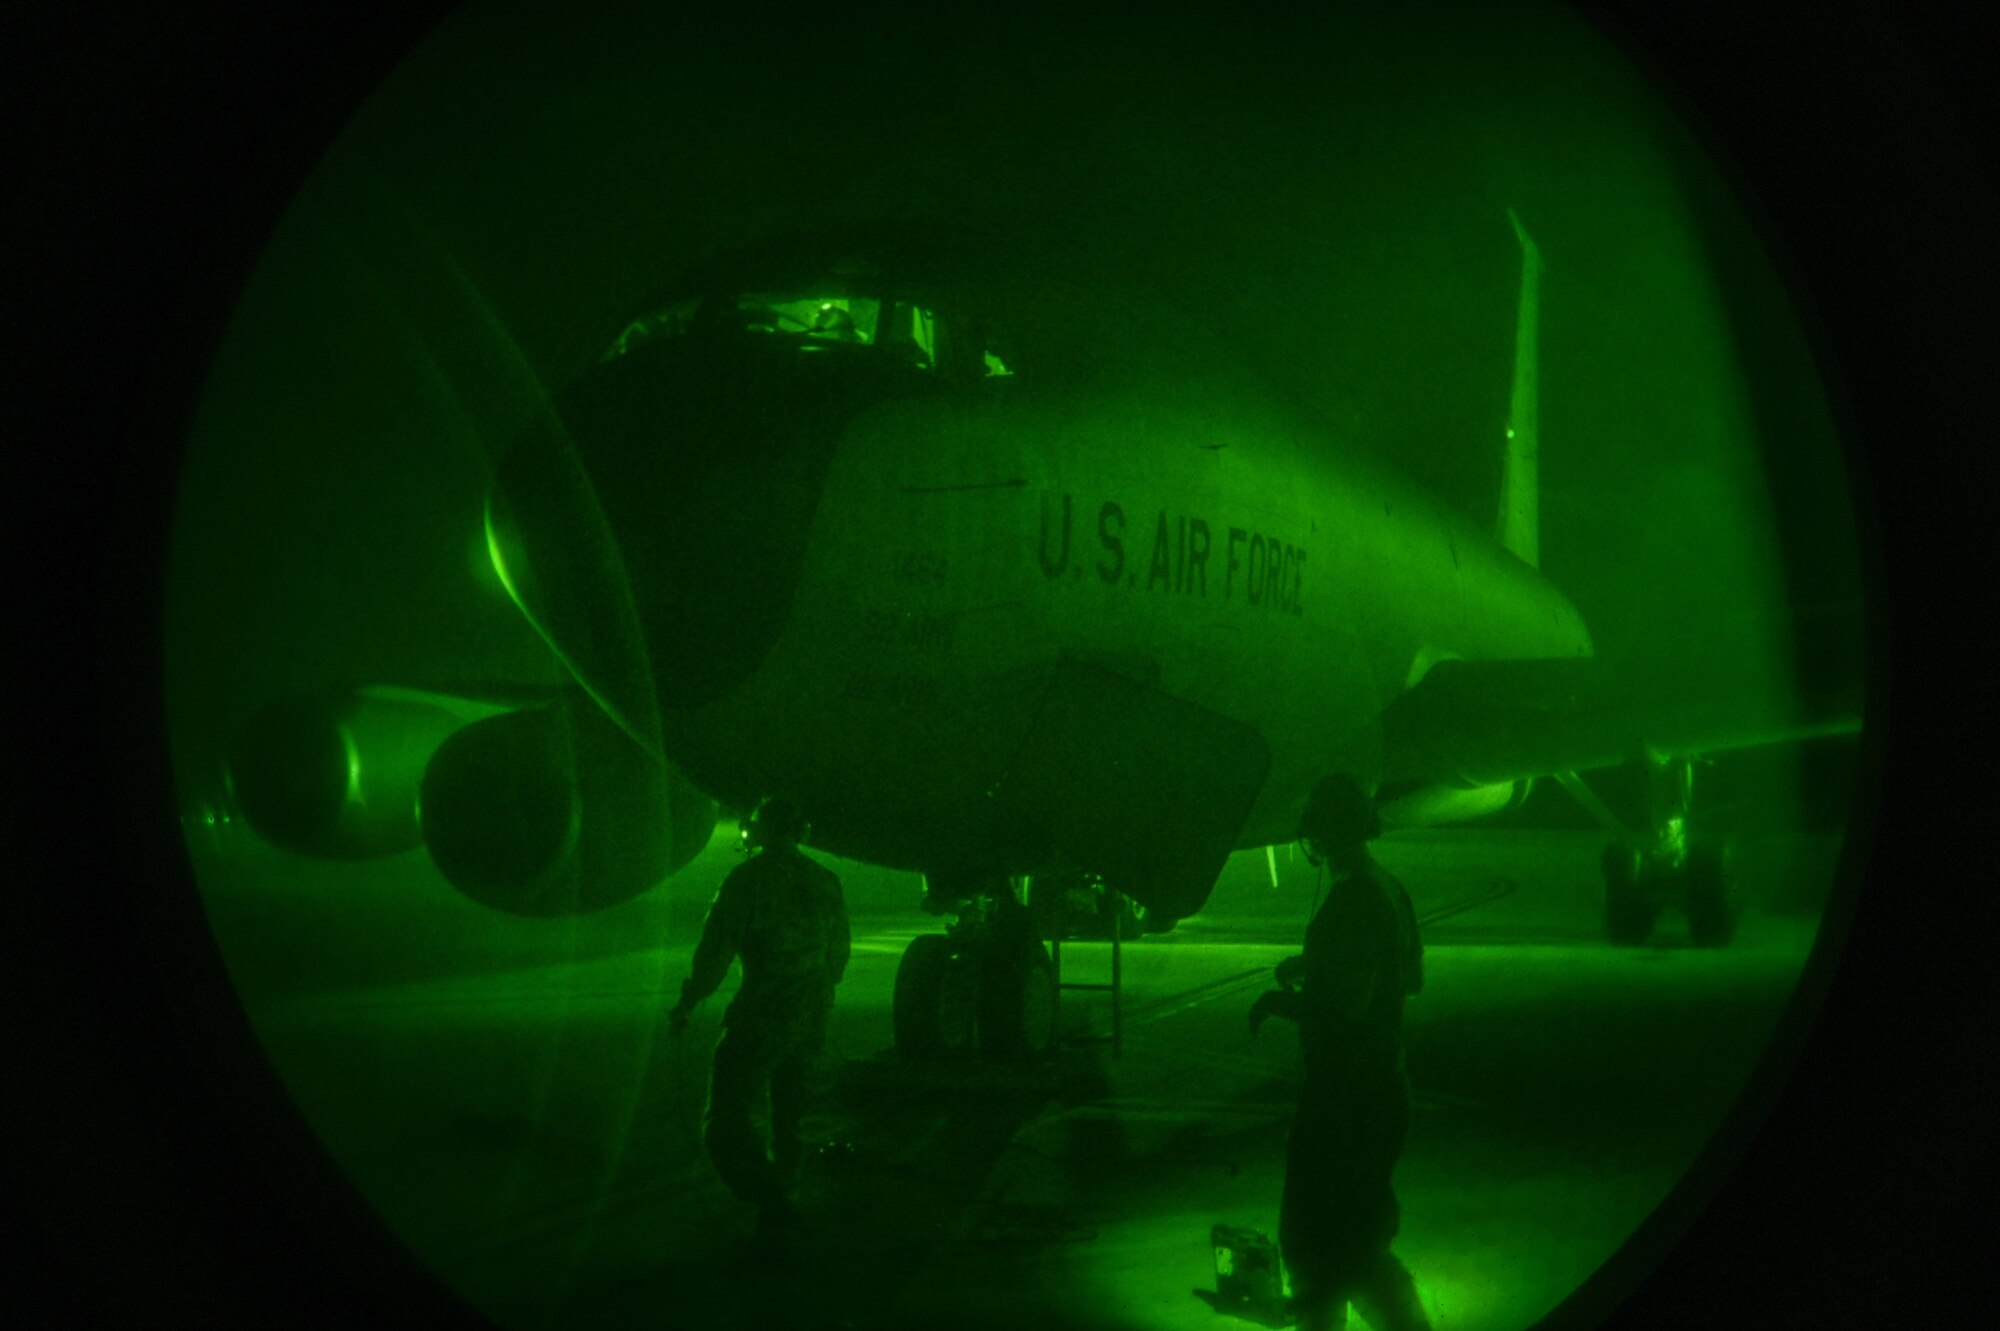 U.S. Air Force Airmen assigned to the 92nd Aircraft Maintenance Squadron perform hot-pit refueling on a KC-135 Stratotanker during an endurance exercise at MacDill Air Force Base Florida, Feb. 15, 2023. This exercise is an example of how the 92nd Air Refueling Wing is engaged, postured, and ready with credible force to assure, deter, and defend in an increasingly complex security environment. (U.S. Air Force photo by Airman 1st Class Haiden Morris)